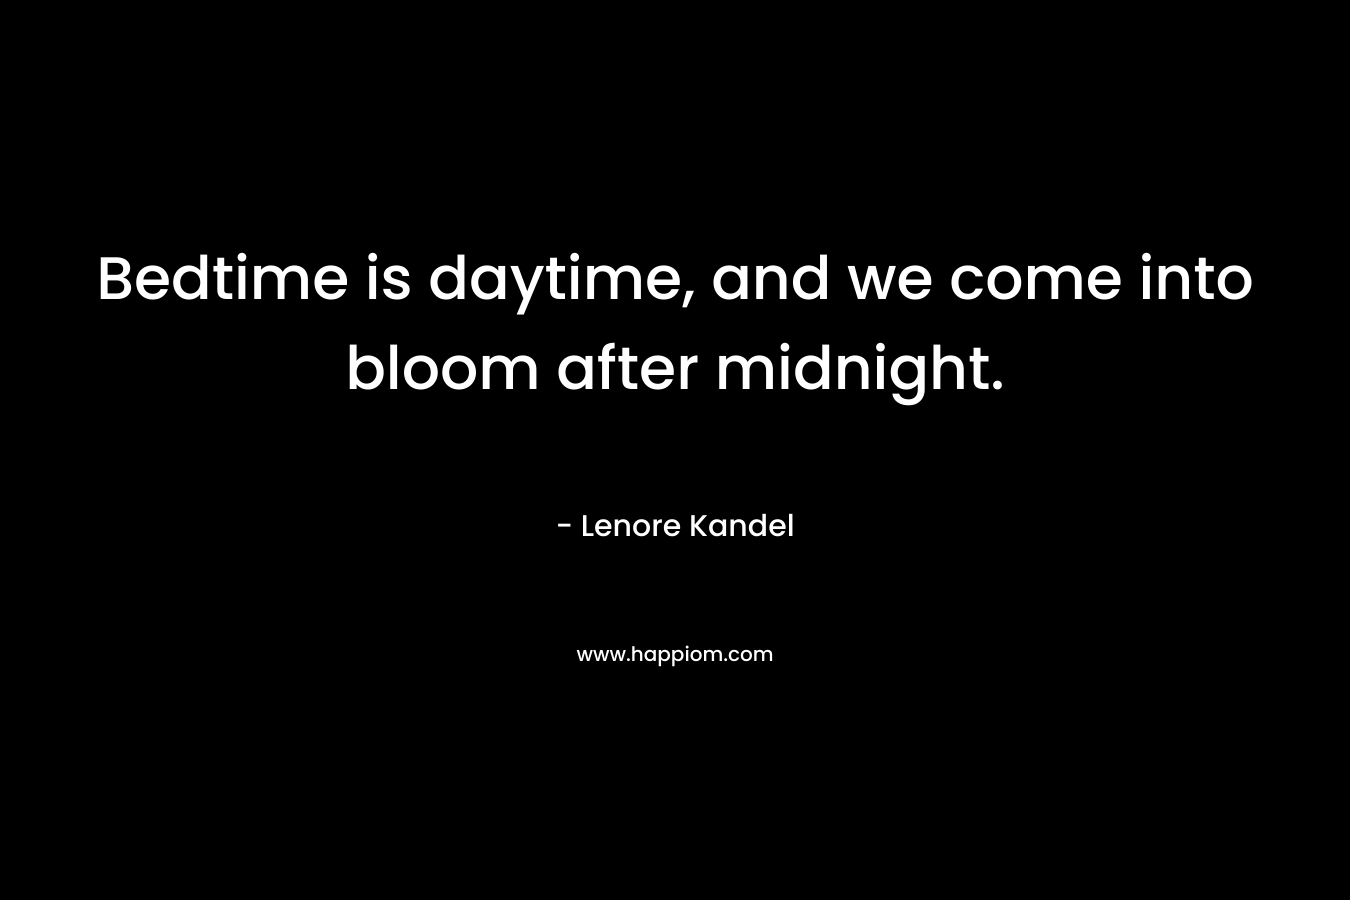 Bedtime is daytime, and we come into bloom after midnight. – Lenore Kandel